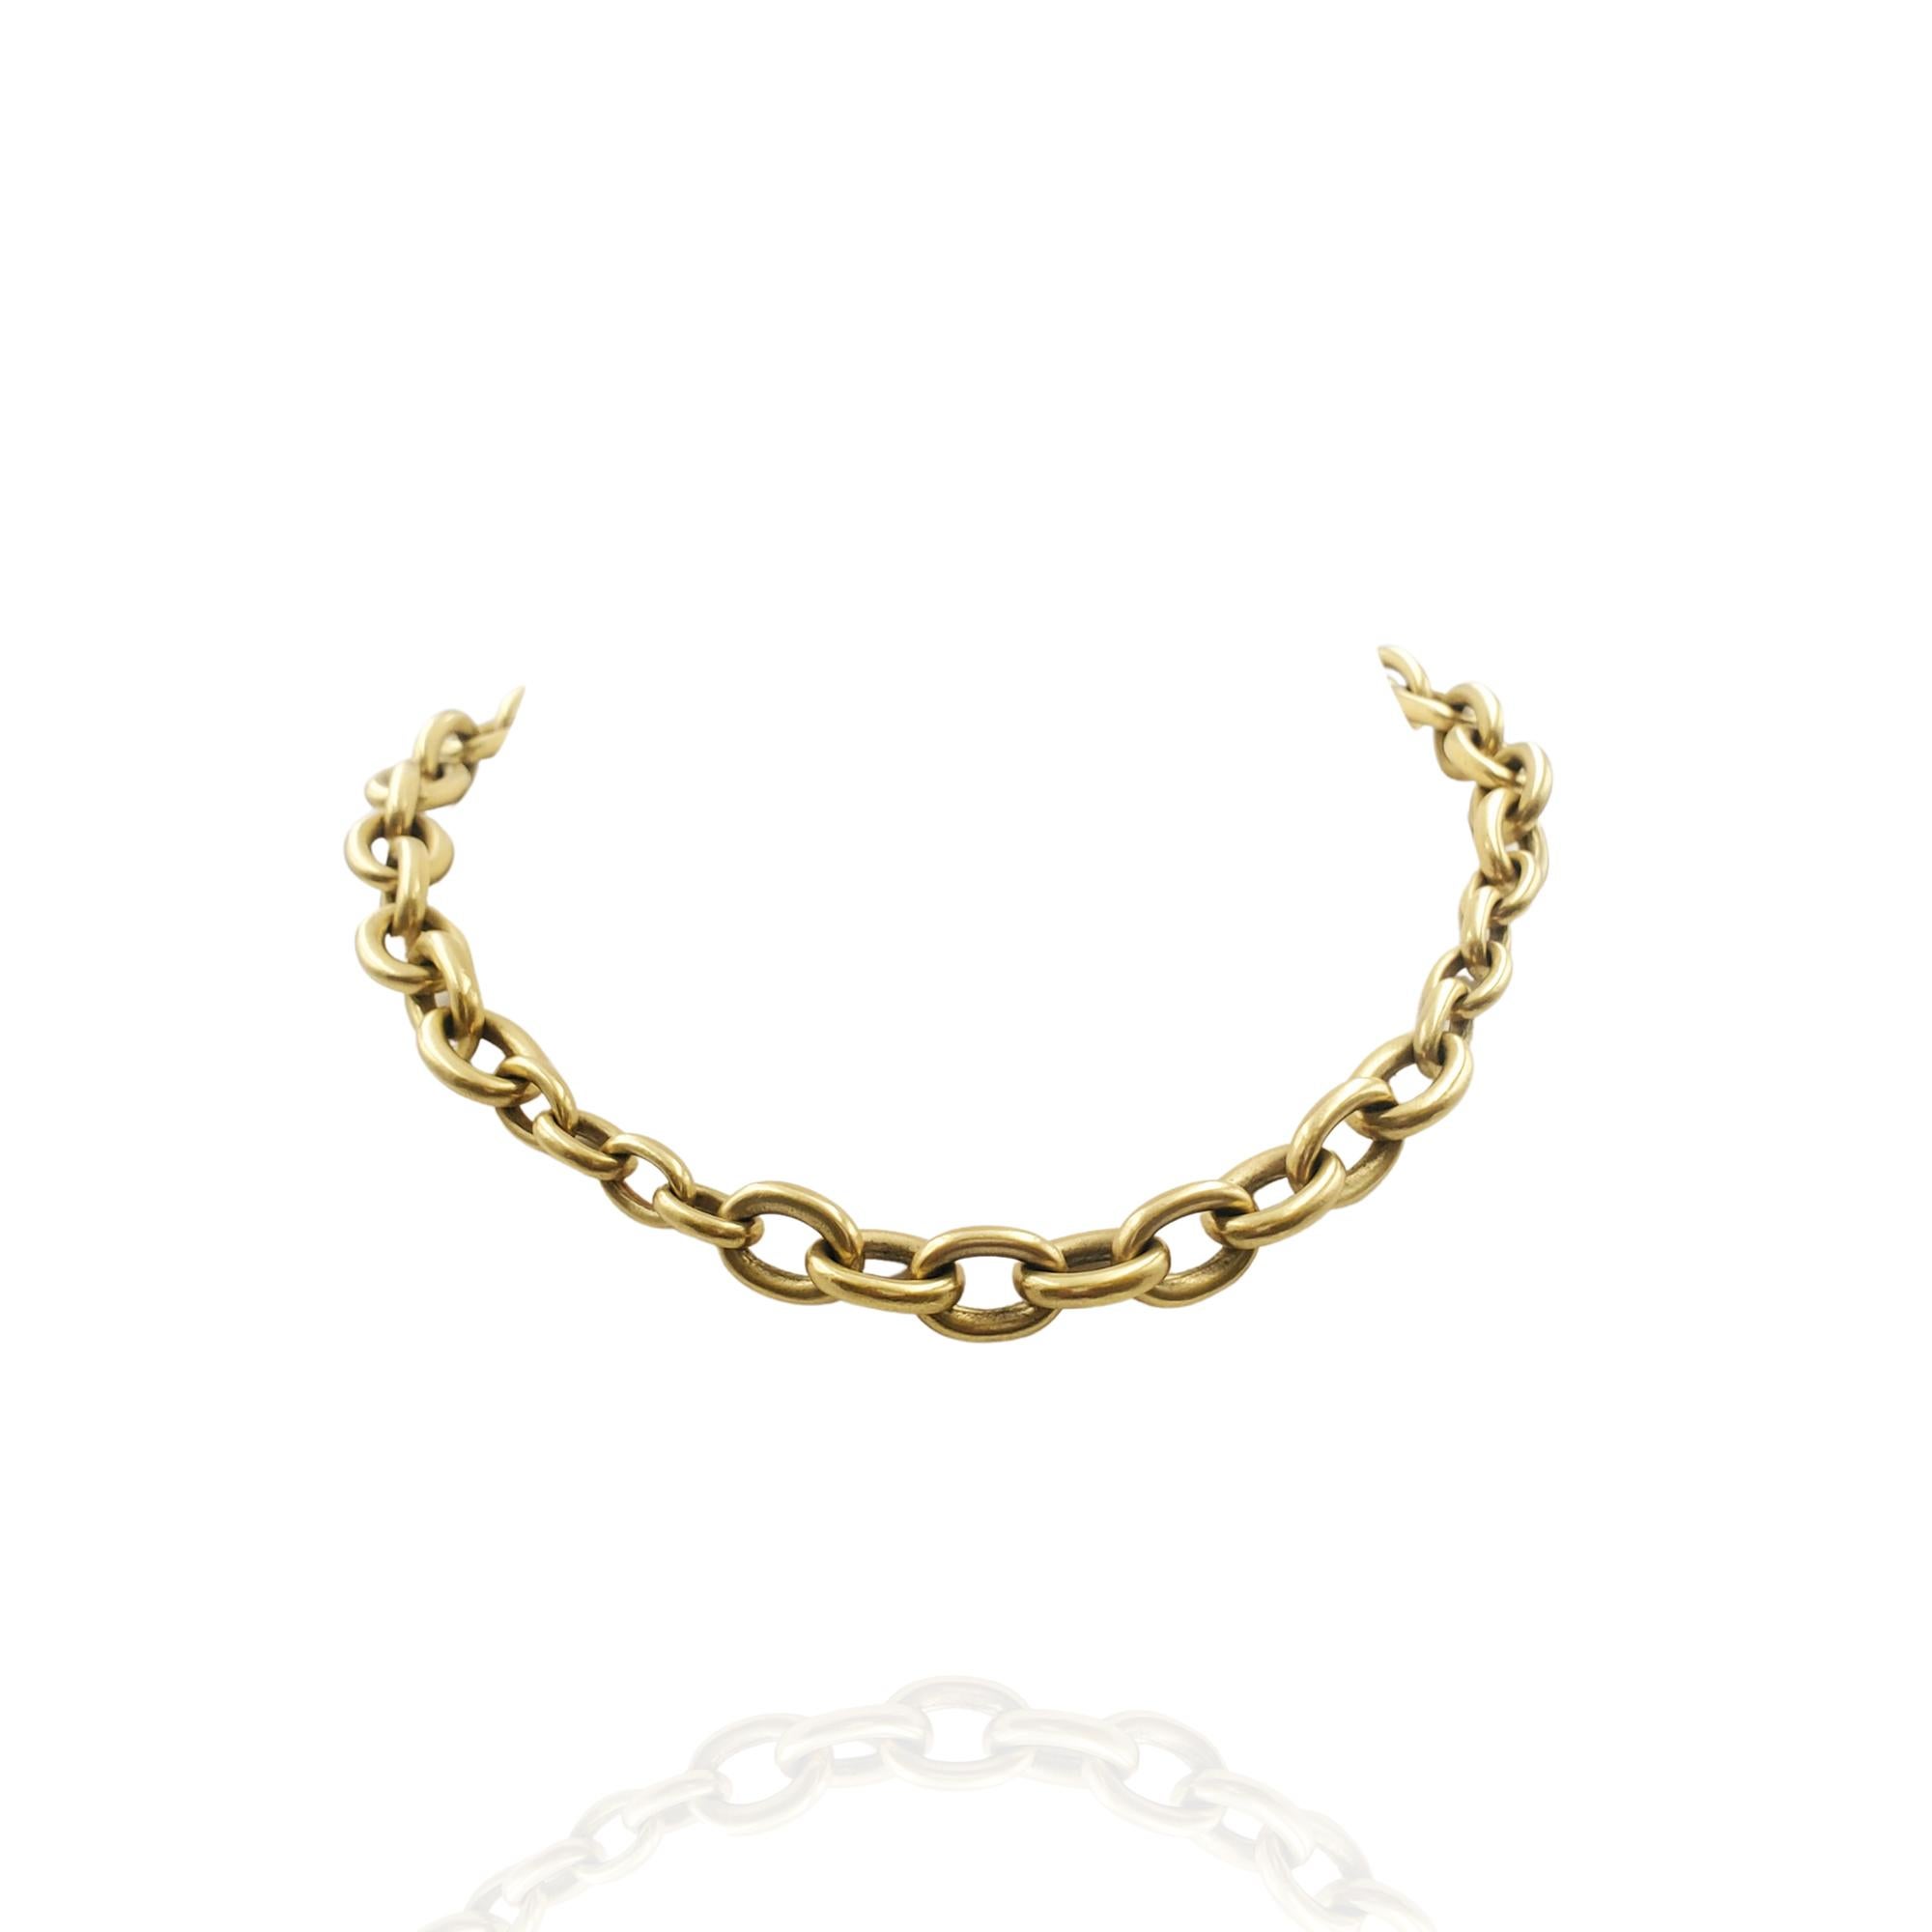 Authentic Barry Kieselstein-Cord necklace crafted in 18 karat yellow gold with a toggle closure. The necklace measures 18 inches in length and features oval links of varying sizes. Signed B. Kieselstein Cord, 1984, USA with hallmarks. Necklace is